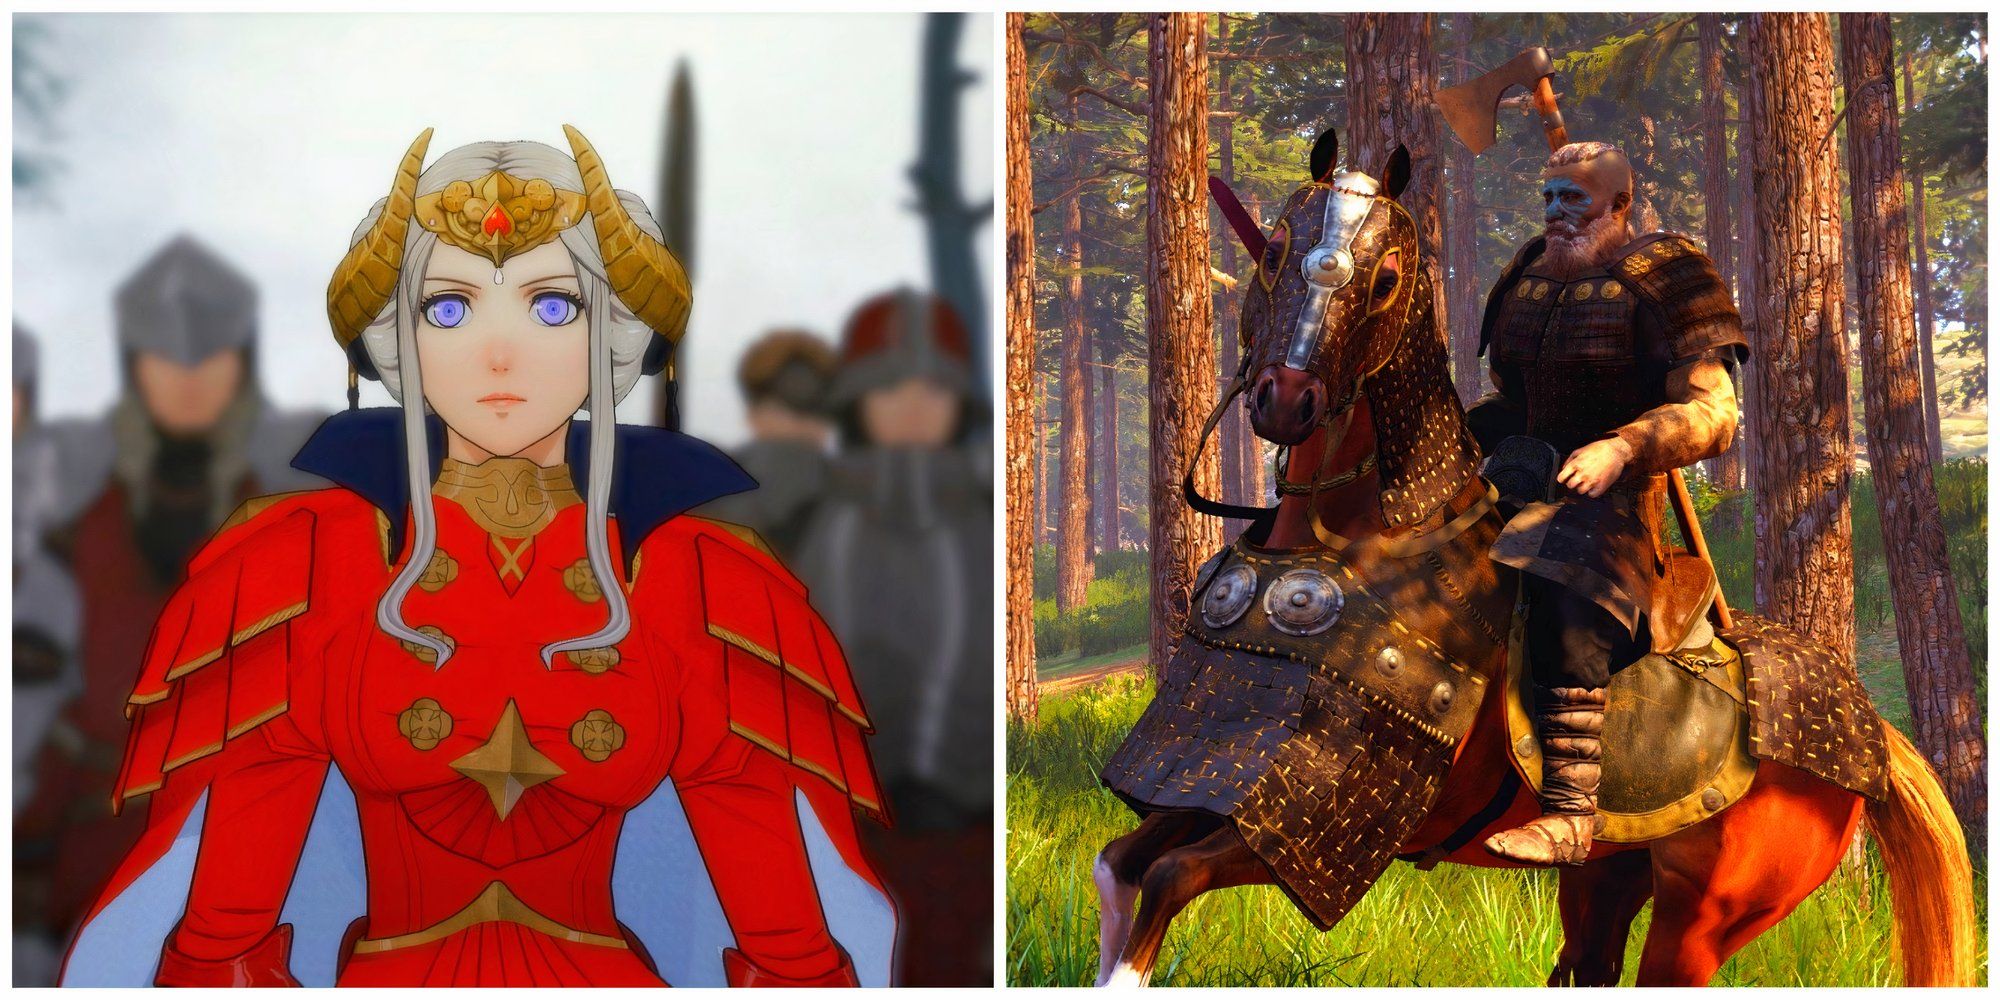 Fire Emblem Three Houses Queen, Mount and Blade 2 Viking on horse